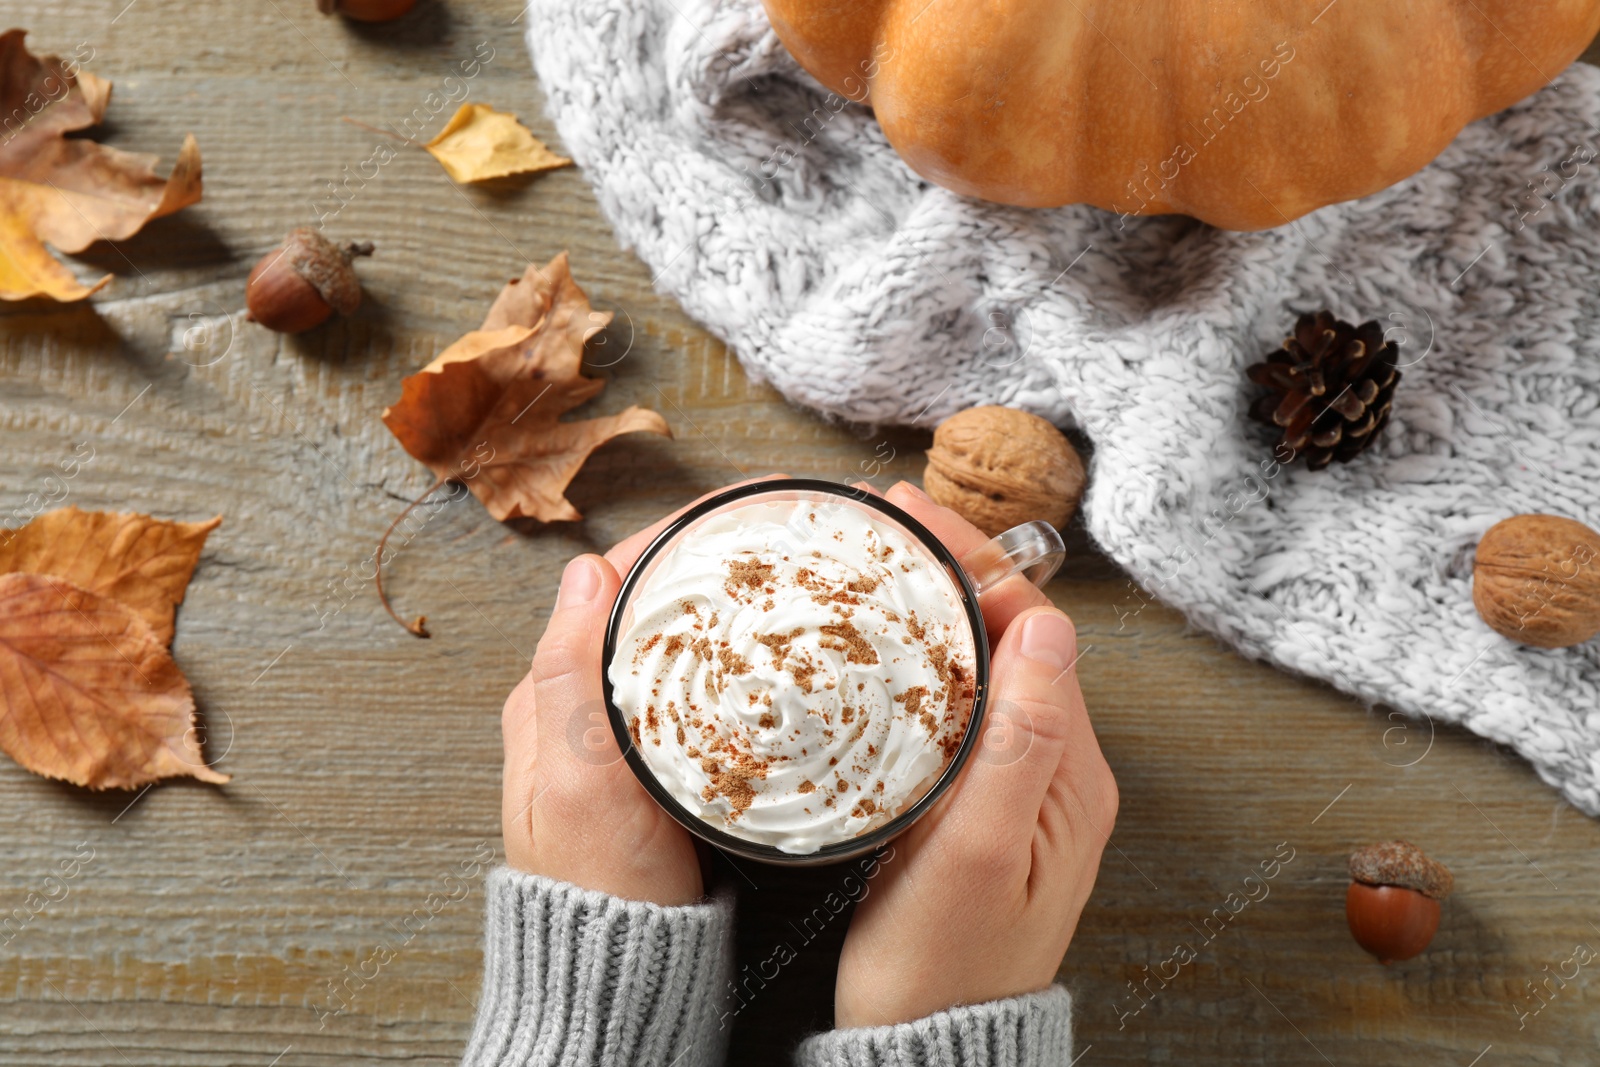 Photo of Woman with cup of pumpkin spice latte at wooden table, top view